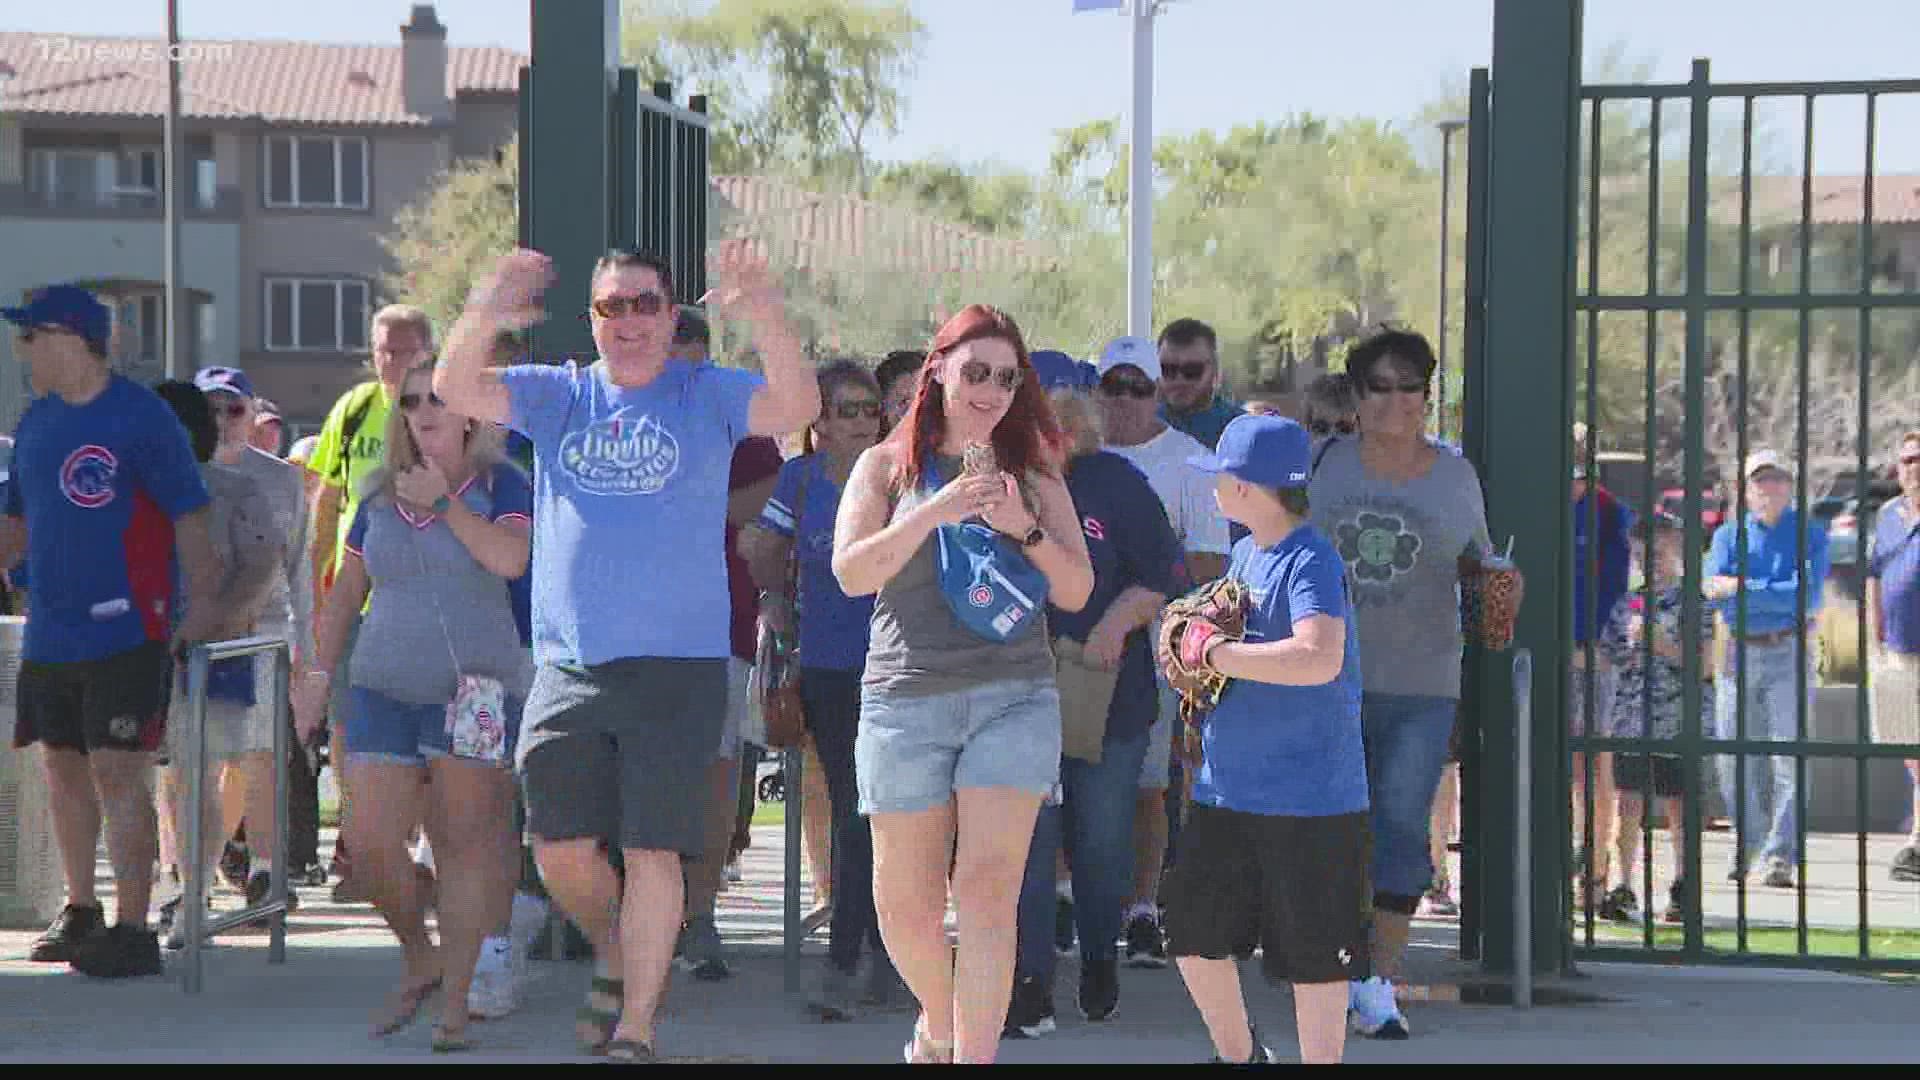 Cubs fans from across the country poured into Sloan Park in Mesa to enjoy the return of baseball even though there wasn't a scheduled game.